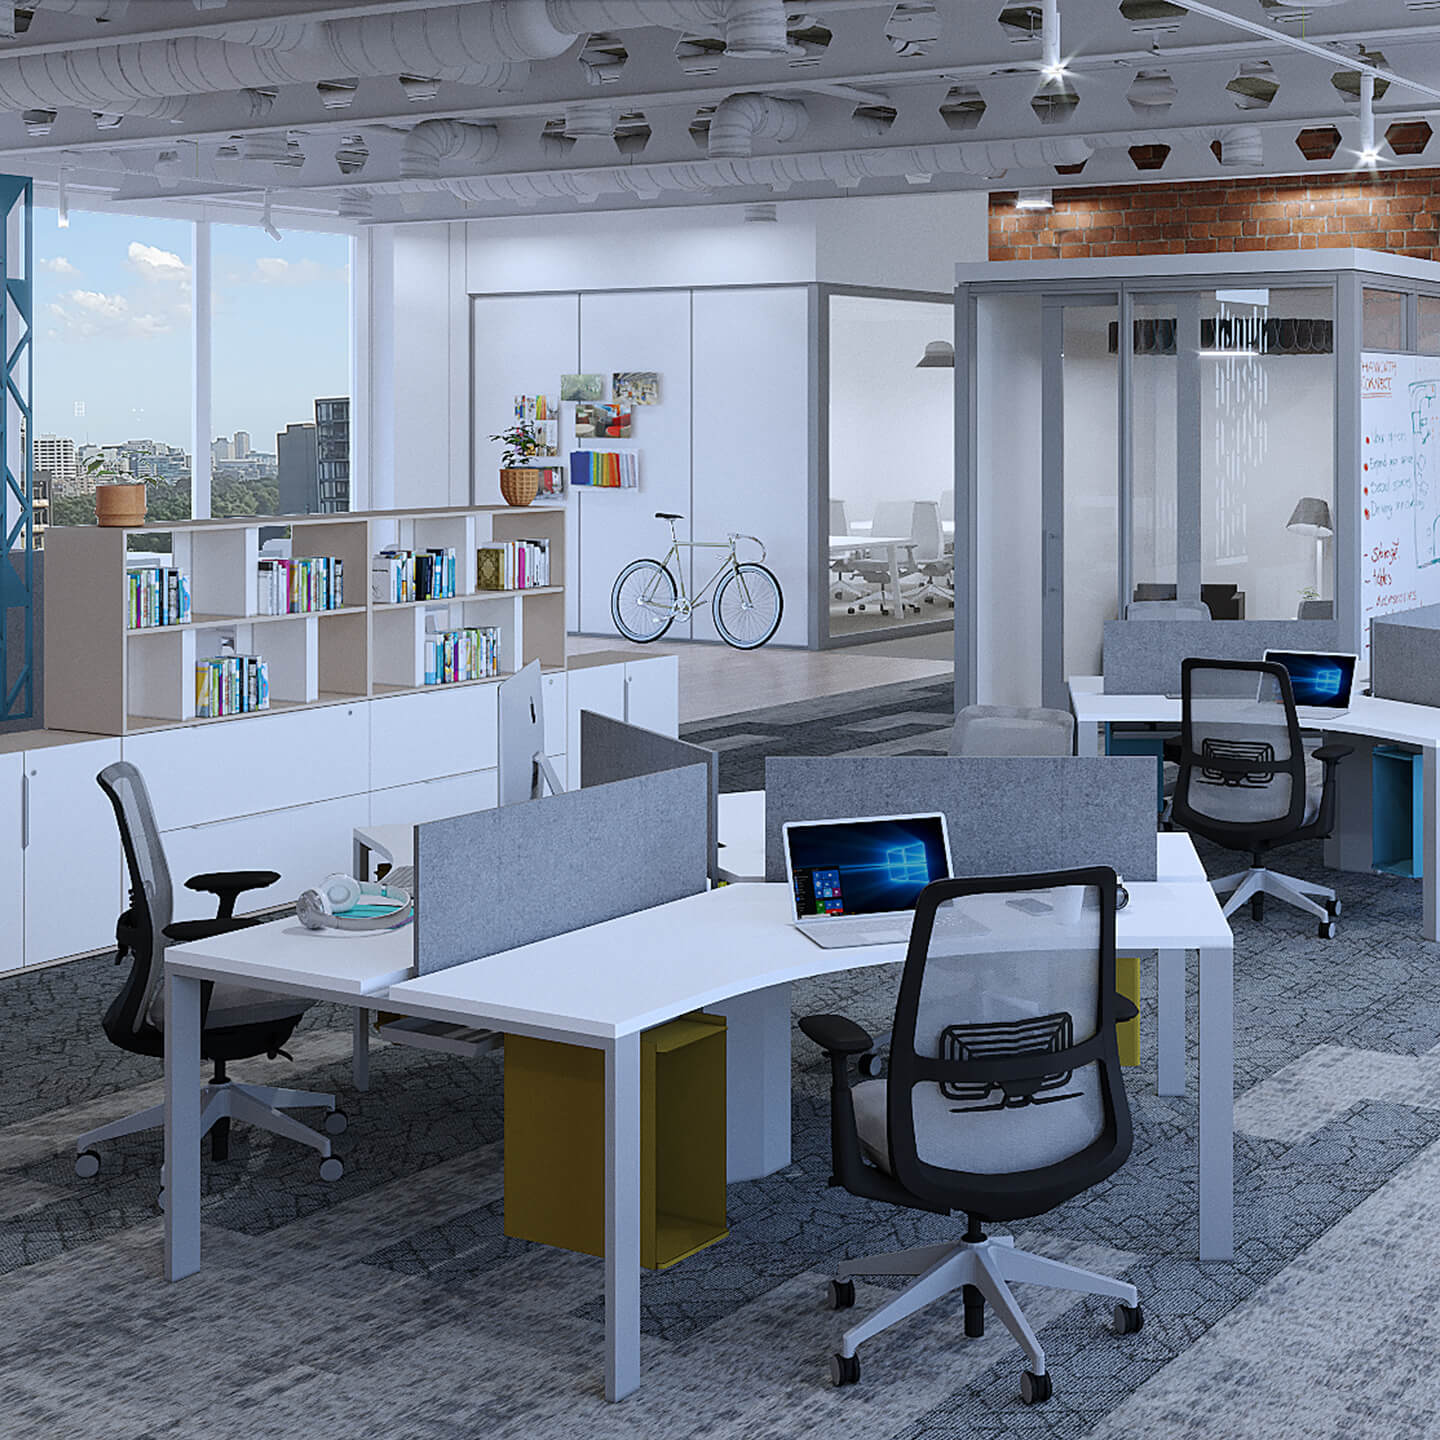 Haworth EZ Workspace partial divider at desk space with other desks near it in an open office setting